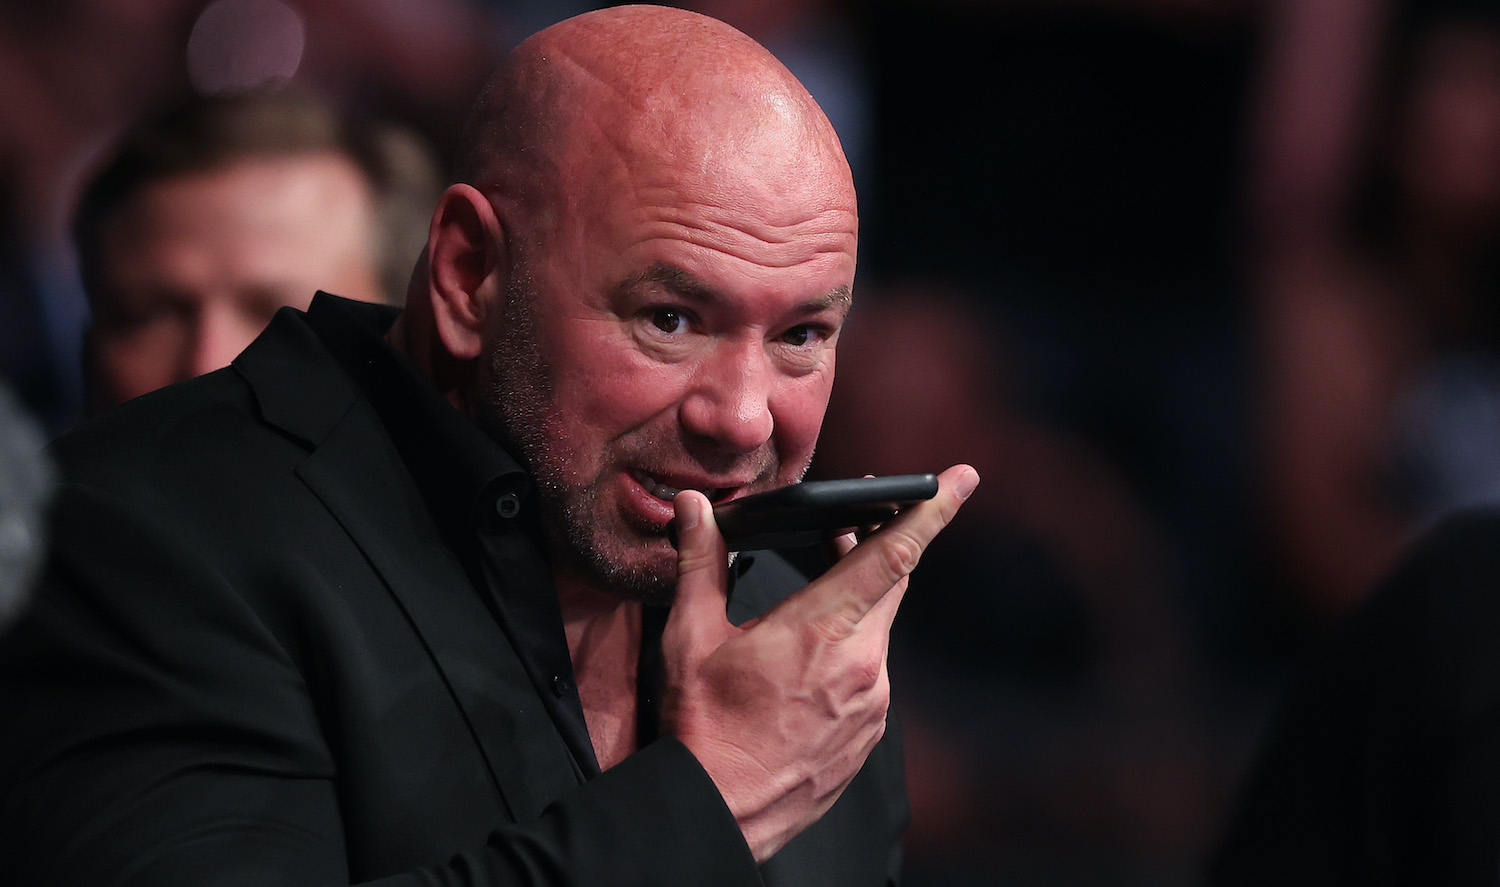 PHOENIX, ARIZONA - MAY 07: President of the Ultimate Fighting Championship, Dana White attends UFC 274 at Footprint Center on May 07, 2022 in Phoenix, Arizona. (Photo by Christian Petersen/Getty Images)